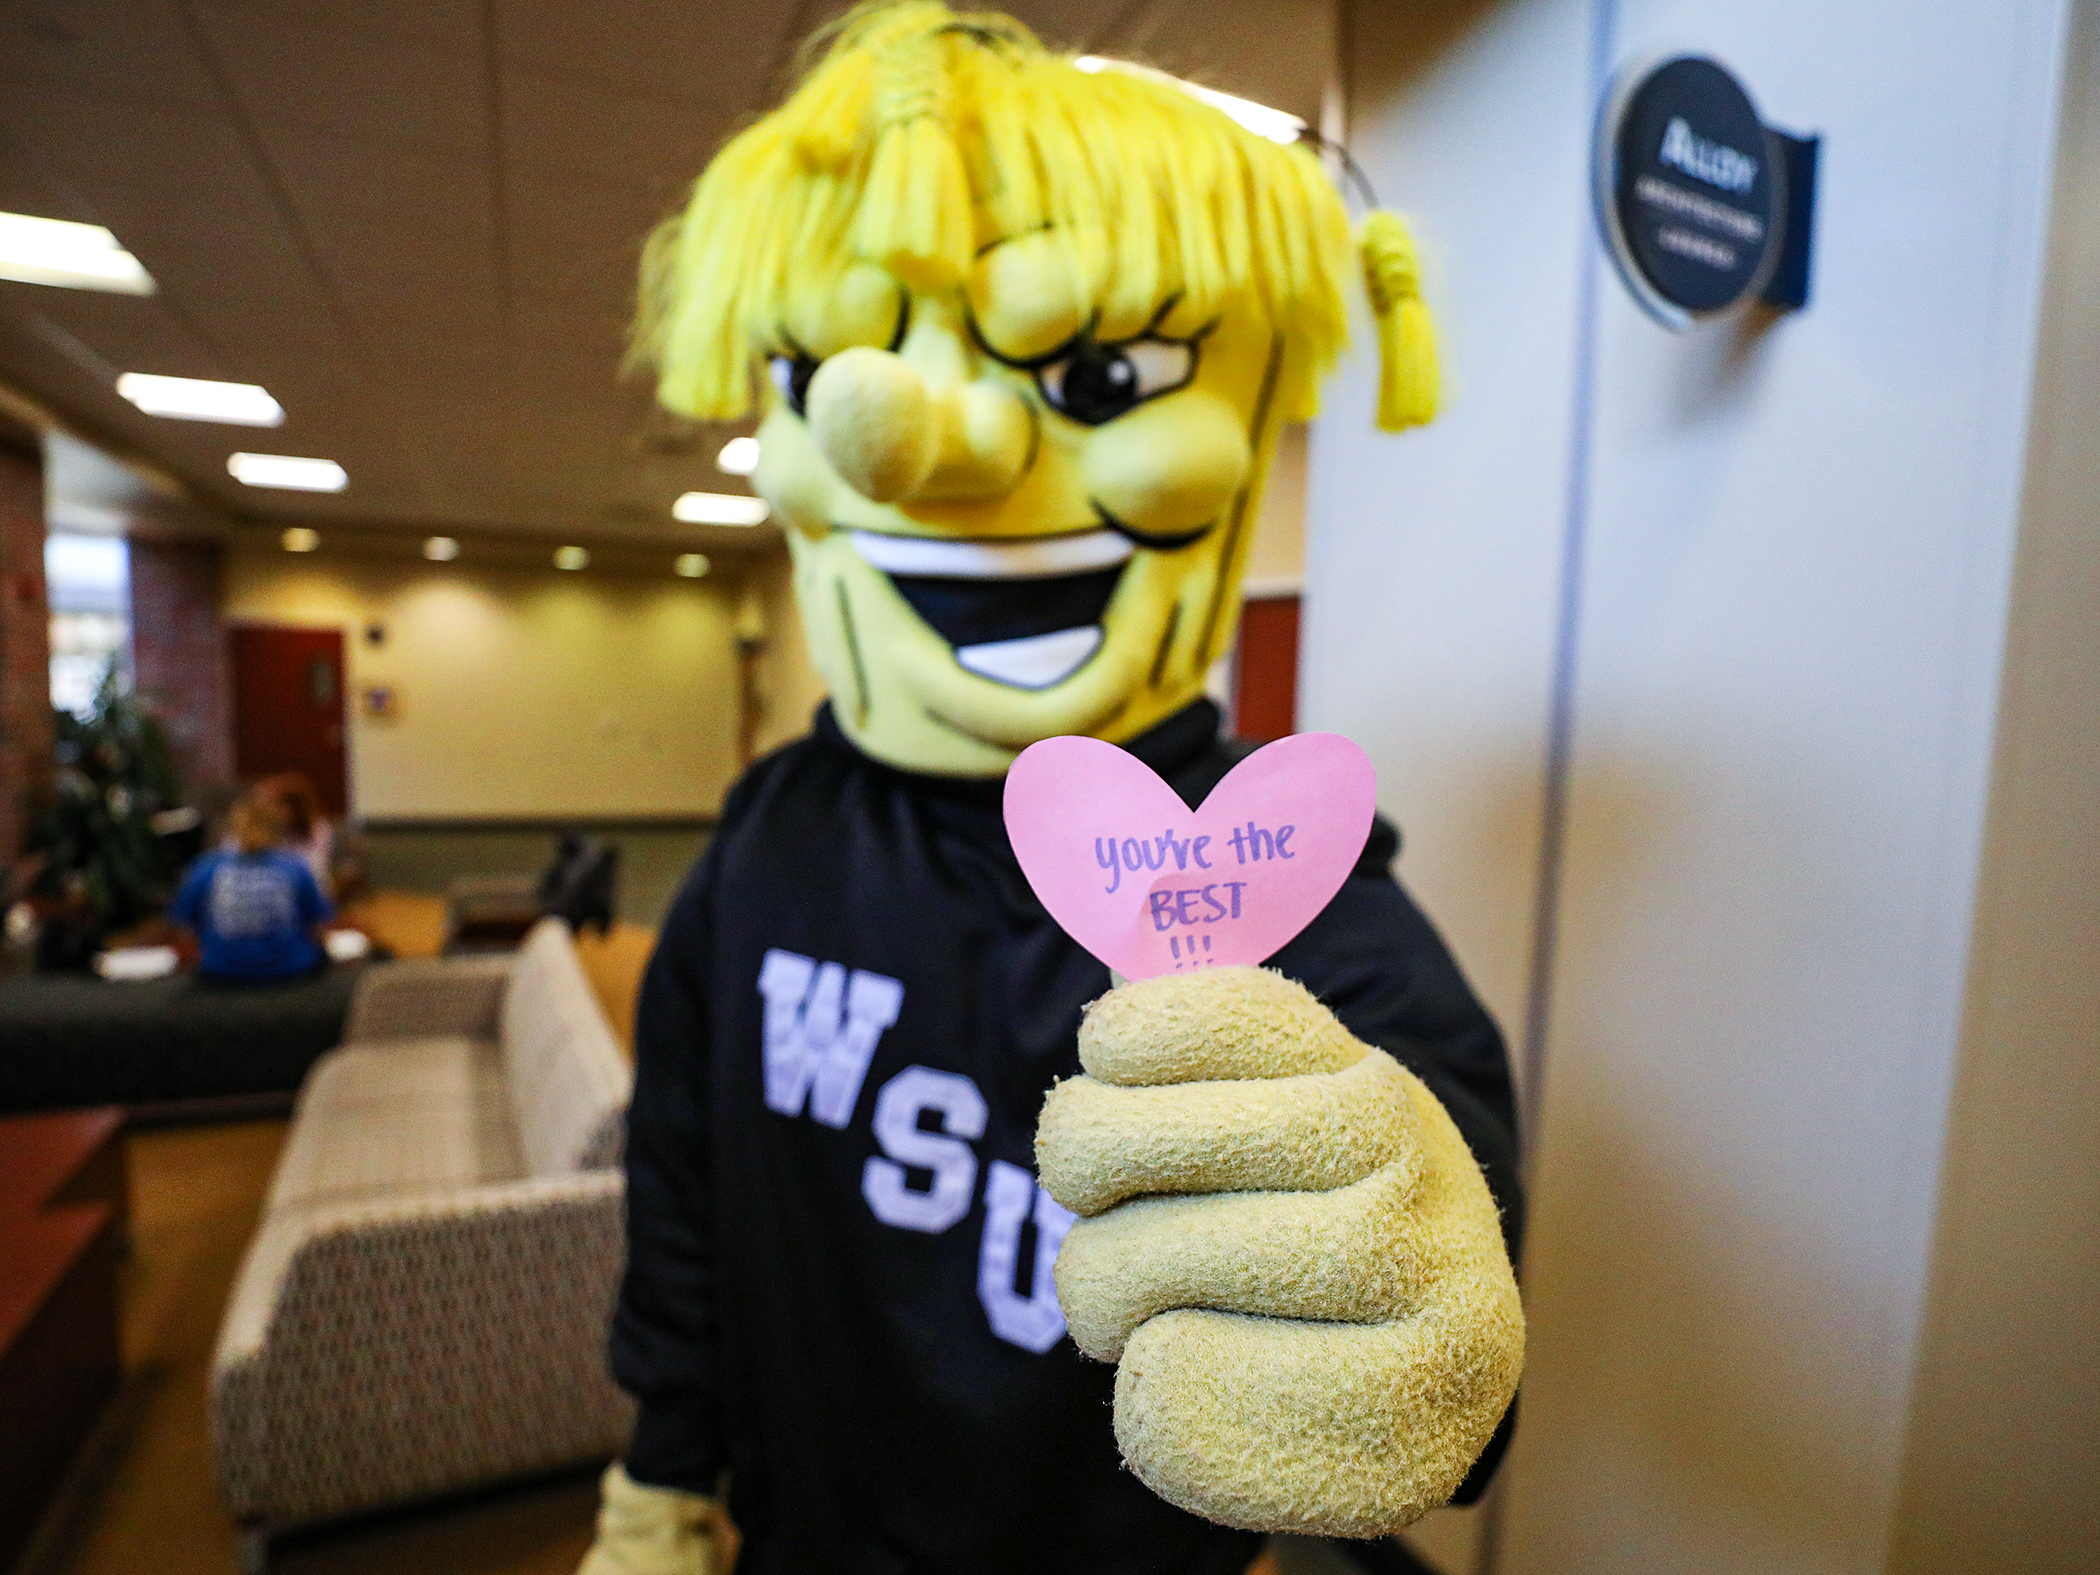 WuShock holding up a "You're the best" heart.